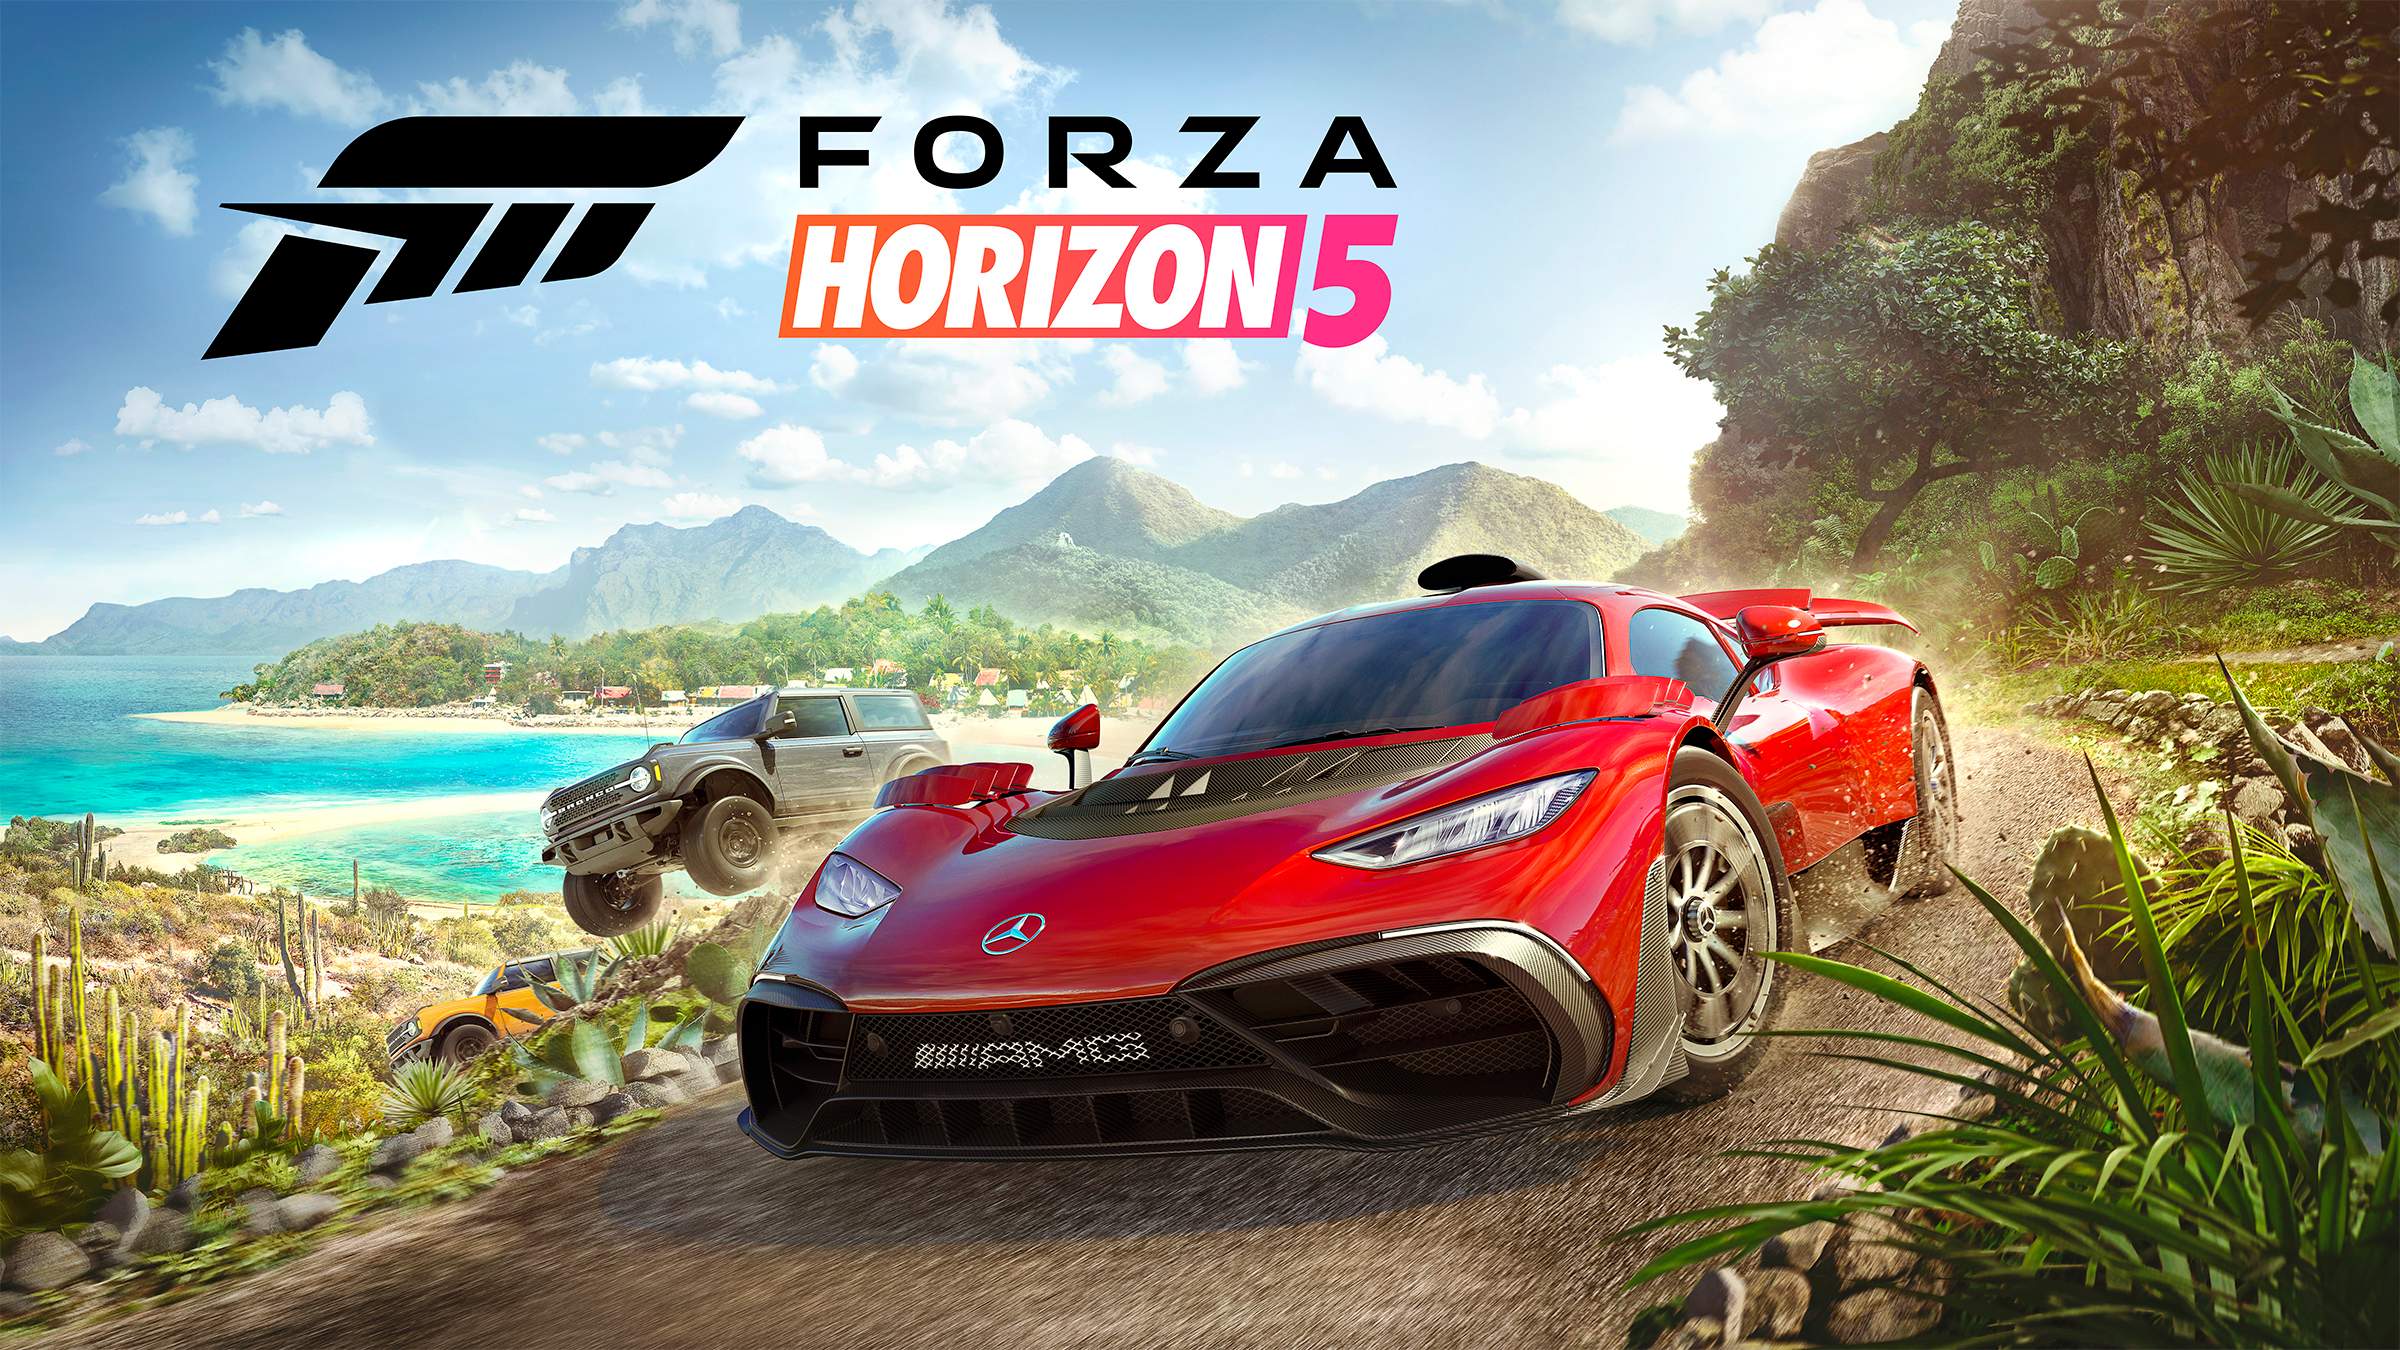 Forza Horizon 5 Shows Off Its Cover Cars And Driving Gameplay at Gamescom – Gameranx